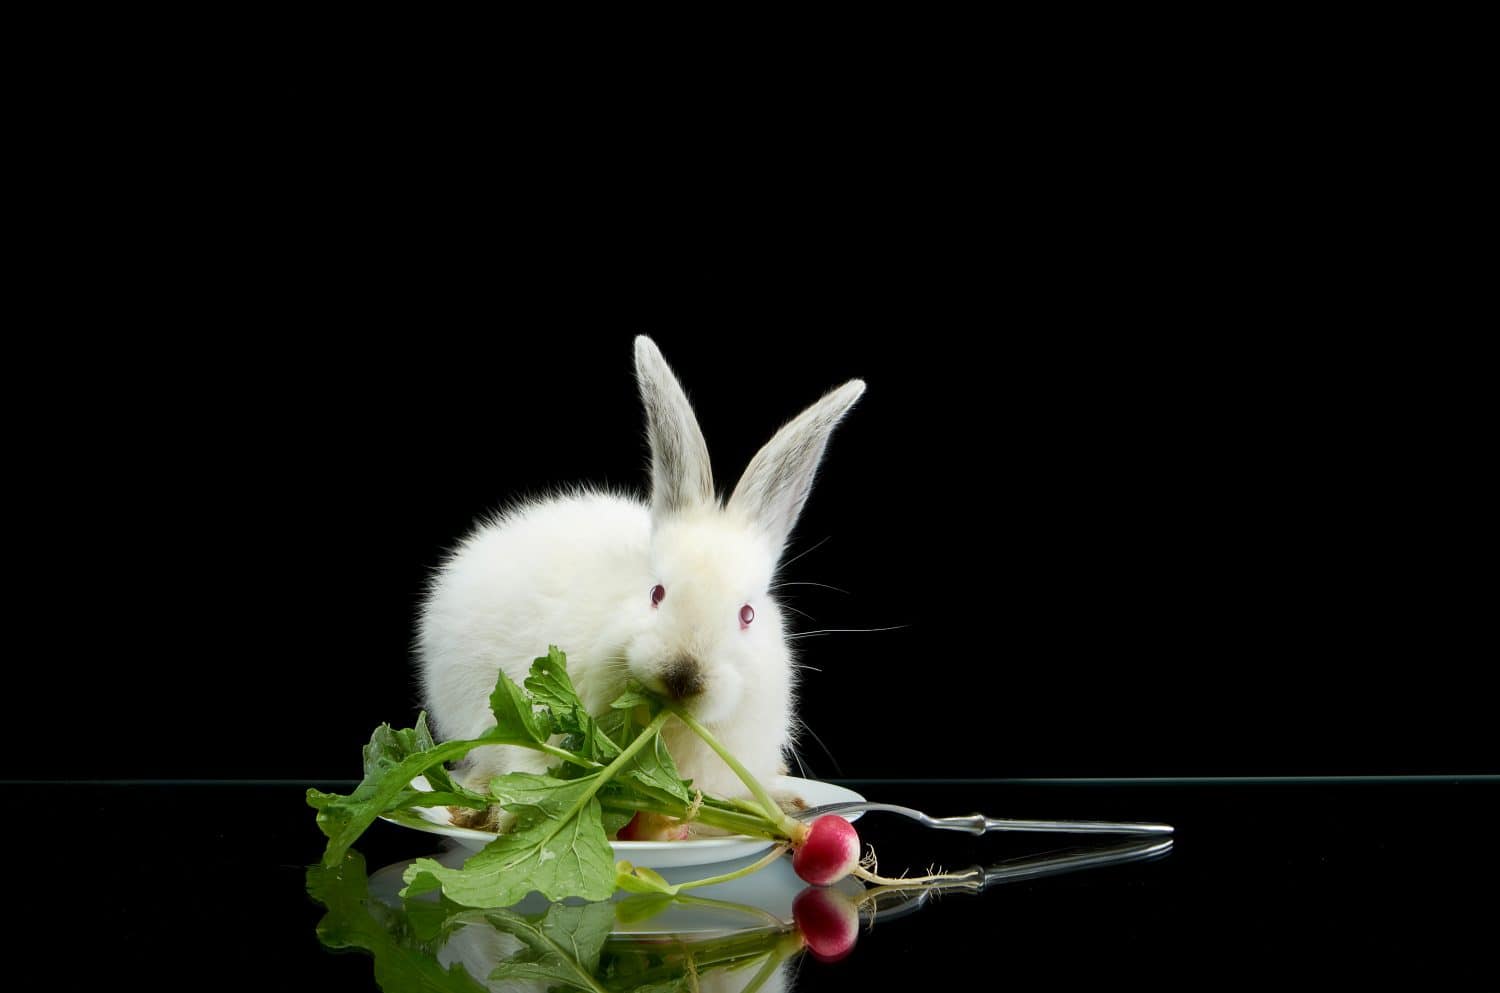 Young white rabbit eating radish in white plate on black background